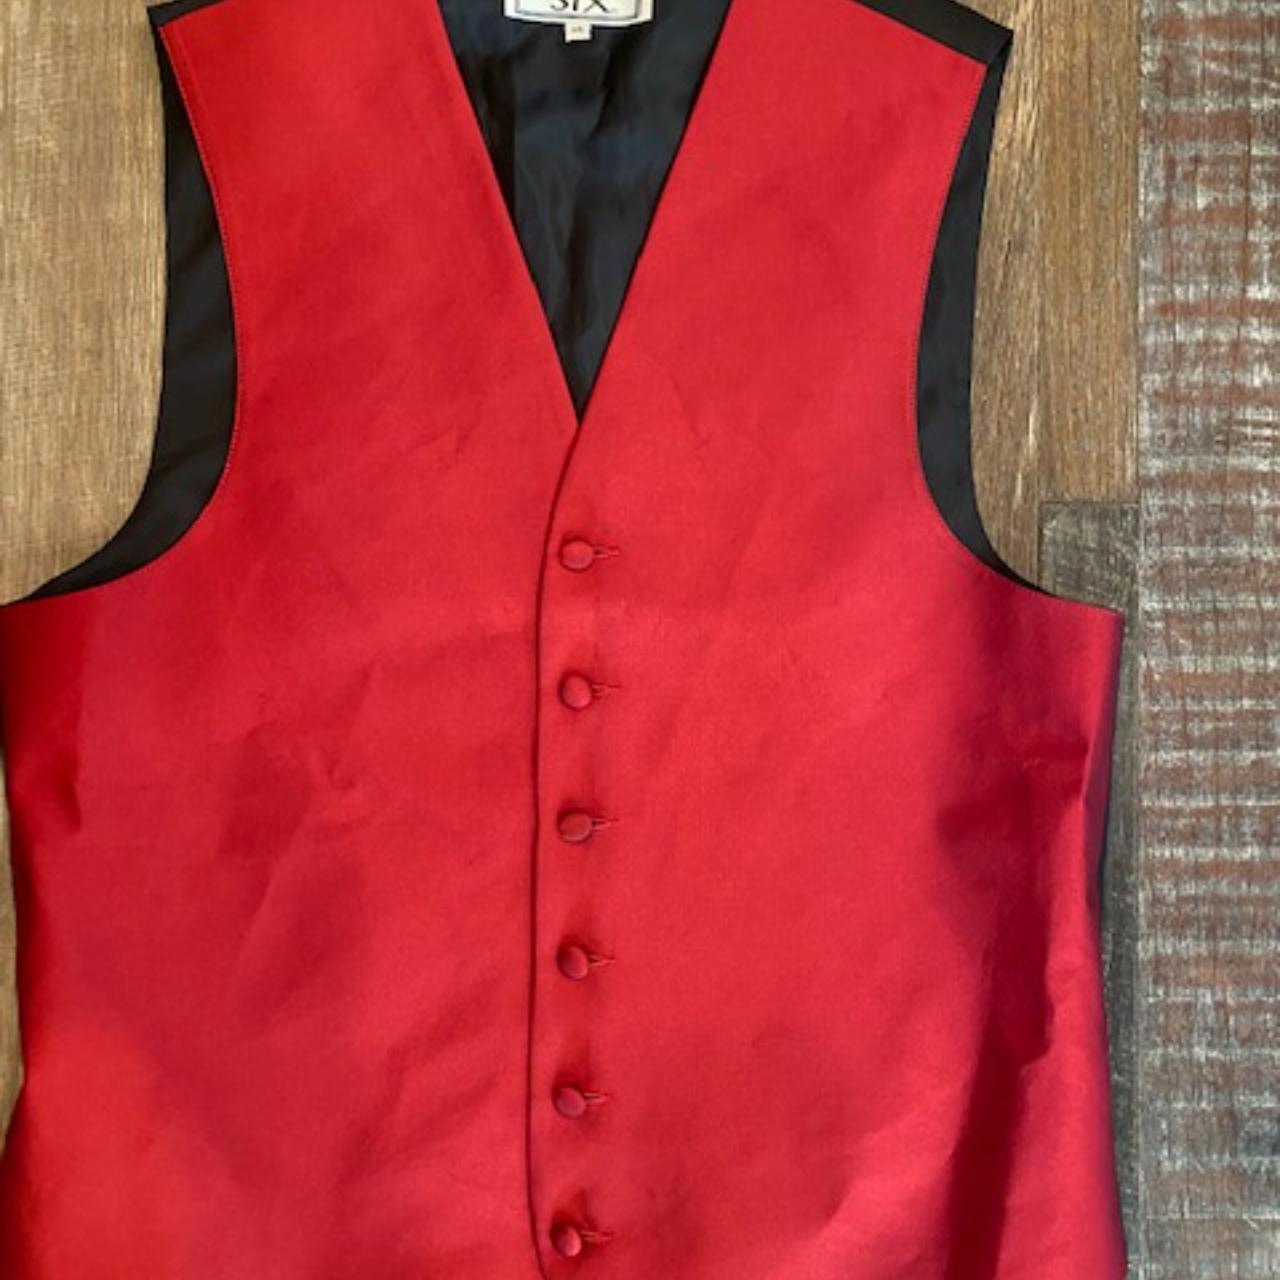 After Six Men's Black and Red Gilet (2)